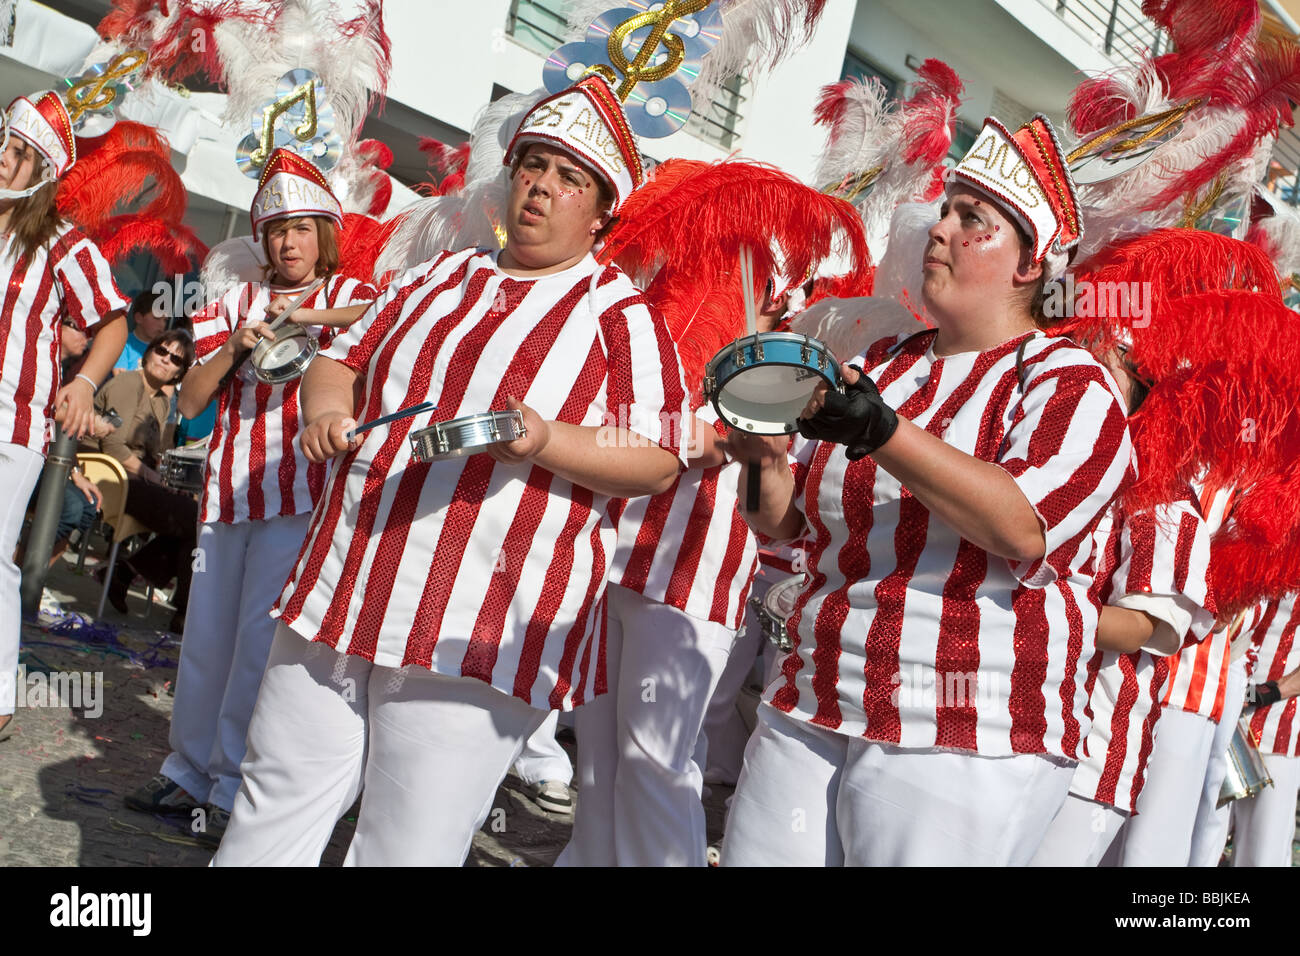 Image from the “Bateria”, the percussion musicians of the Samba School, during the Brazilian Carnival. Sesimbra, Portugal Stock Photo